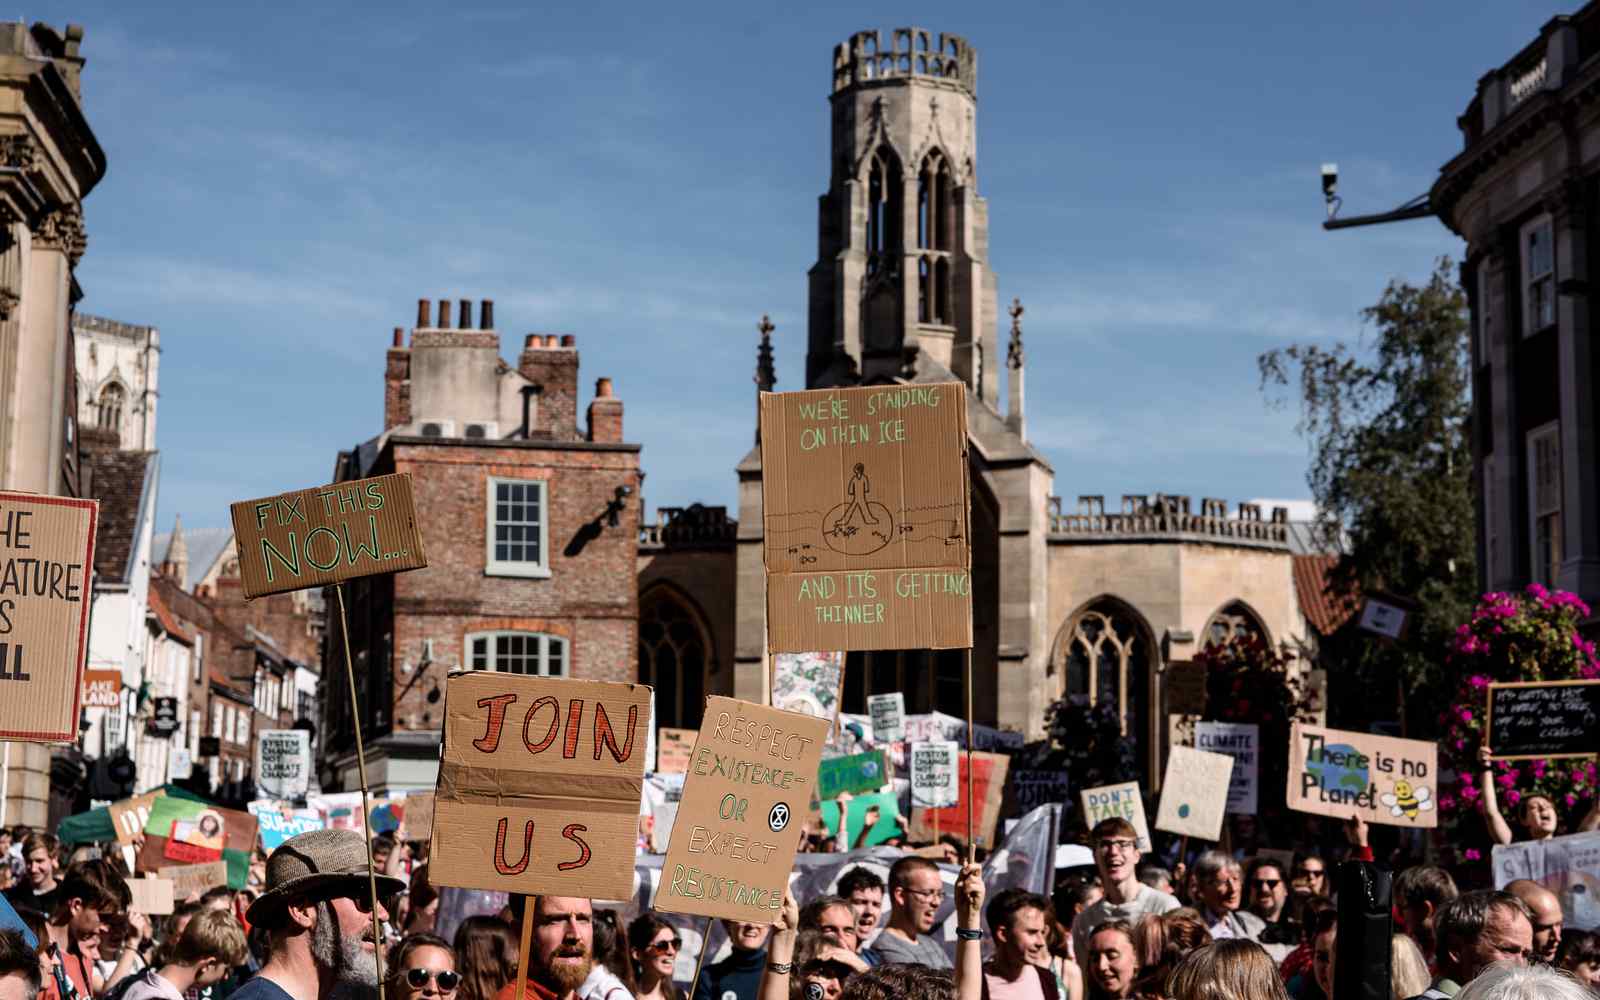 Students on climate strike in York city centre 